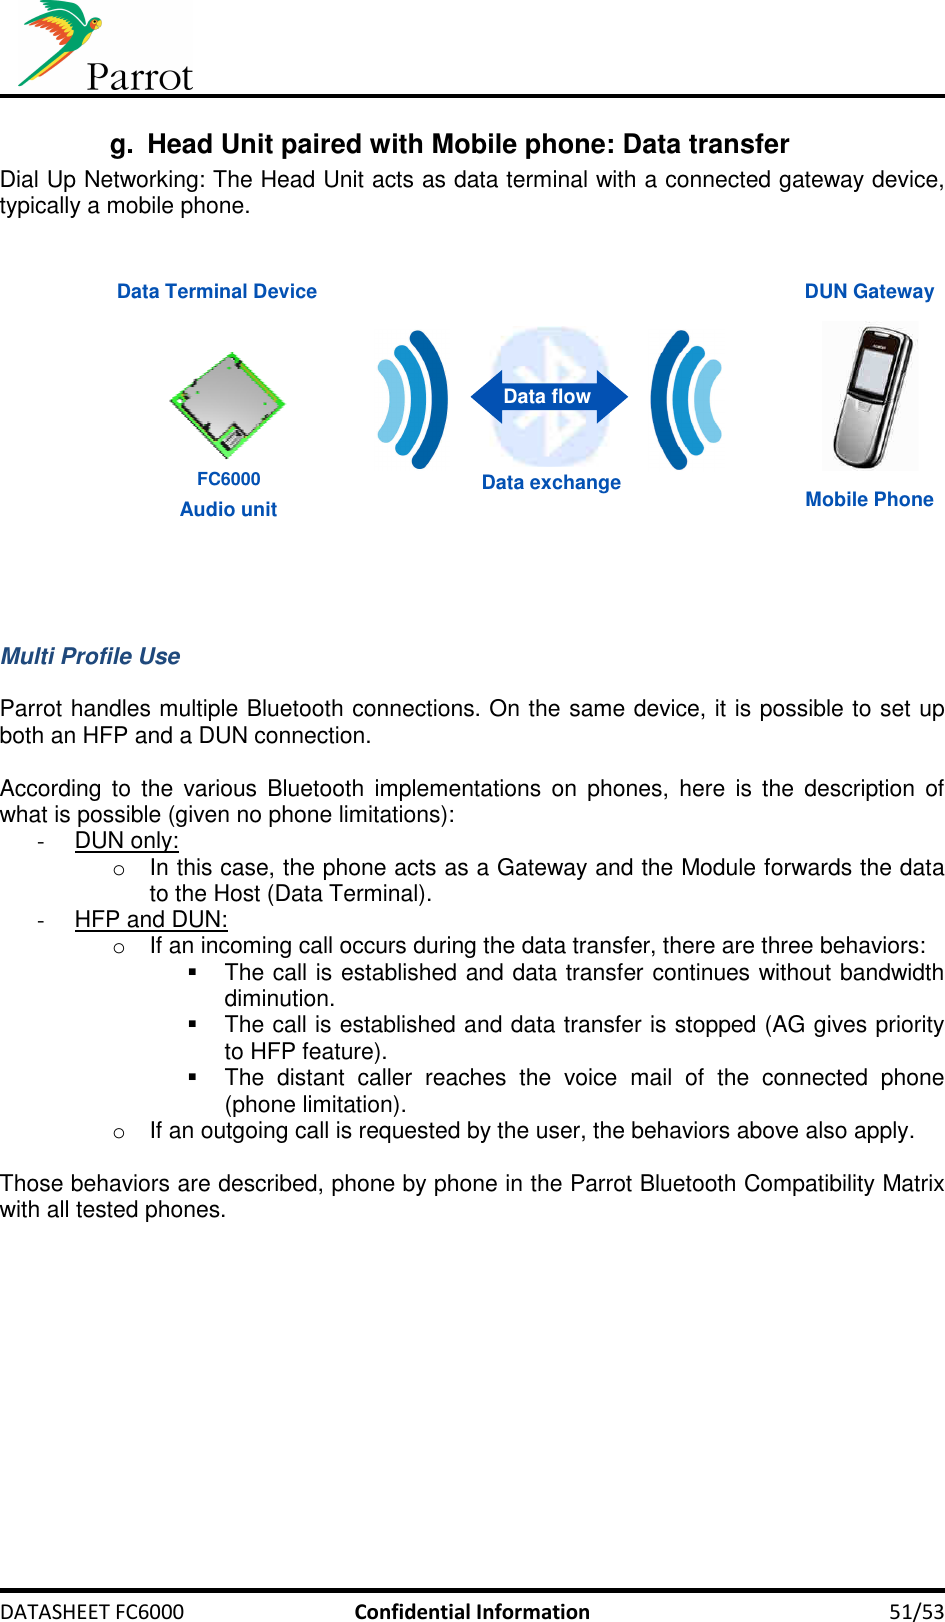     DATASHEET FC6000  Confidential Information  51/53 g.  Head Unit paired with Mobile phone: Data transfer Dial Up Networking: The Head Unit acts as data terminal with a connected gateway device, typically a mobile phone.    DUN Gateway Data Terminal DeviceMobile PhoneData exchangeData flowAudio unitFC6000    Multi Profile Use  Parrot handles multiple Bluetooth connections. On the same device, it is possible to set up both an HFP and a DUN connection.  According  to  the  various  Bluetooth  implementations  on  phones,  here  is the  description  of what is possible (given no phone limitations): -  DUN only:  o  In this case, the phone acts as a Gateway and the Module forwards the data to the Host (Data Terminal). -  HFP and DUN: o  If an incoming call occurs during the data transfer, there are three behaviors:    The call is established and data transfer continues without bandwidth diminution.   The call is established and data transfer is stopped (AG gives priority to HFP feature).   The  distant  caller  reaches  the  voice  mail  of  the  connected  phone (phone limitation). o  If an outgoing call is requested by the user, the behaviors above also apply.  Those behaviors are described, phone by phone in the Parrot Bluetooth Compatibility Matrix with all tested phones.  